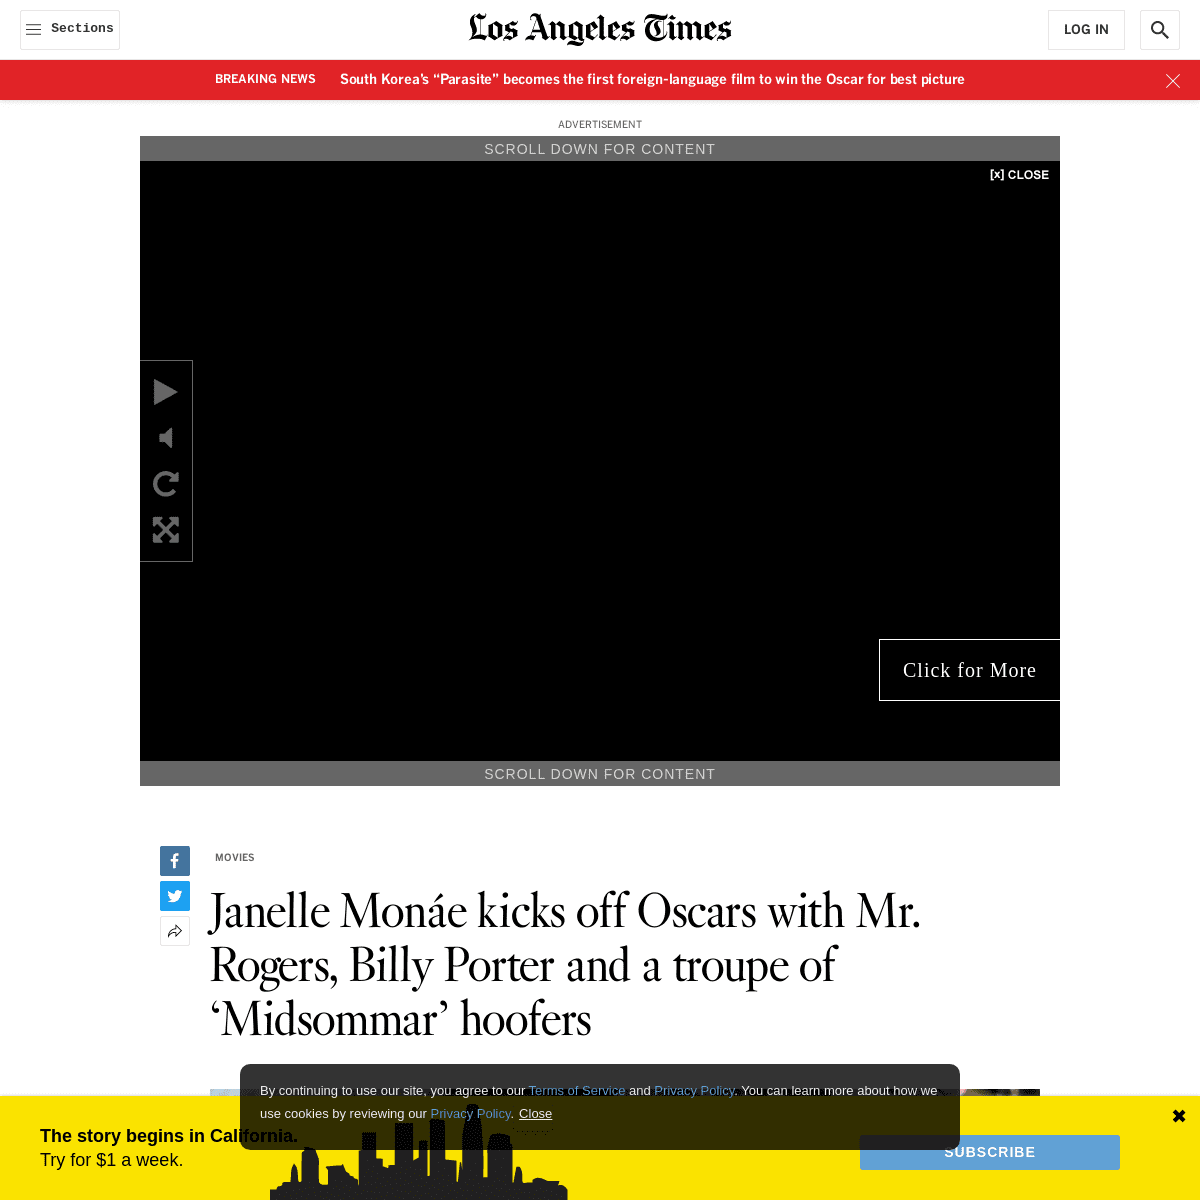 A complete backup of www.latimes.com/entertainment-arts/movies/story/2020-02-09/janelle-monae-oscars-2020-bill-porter